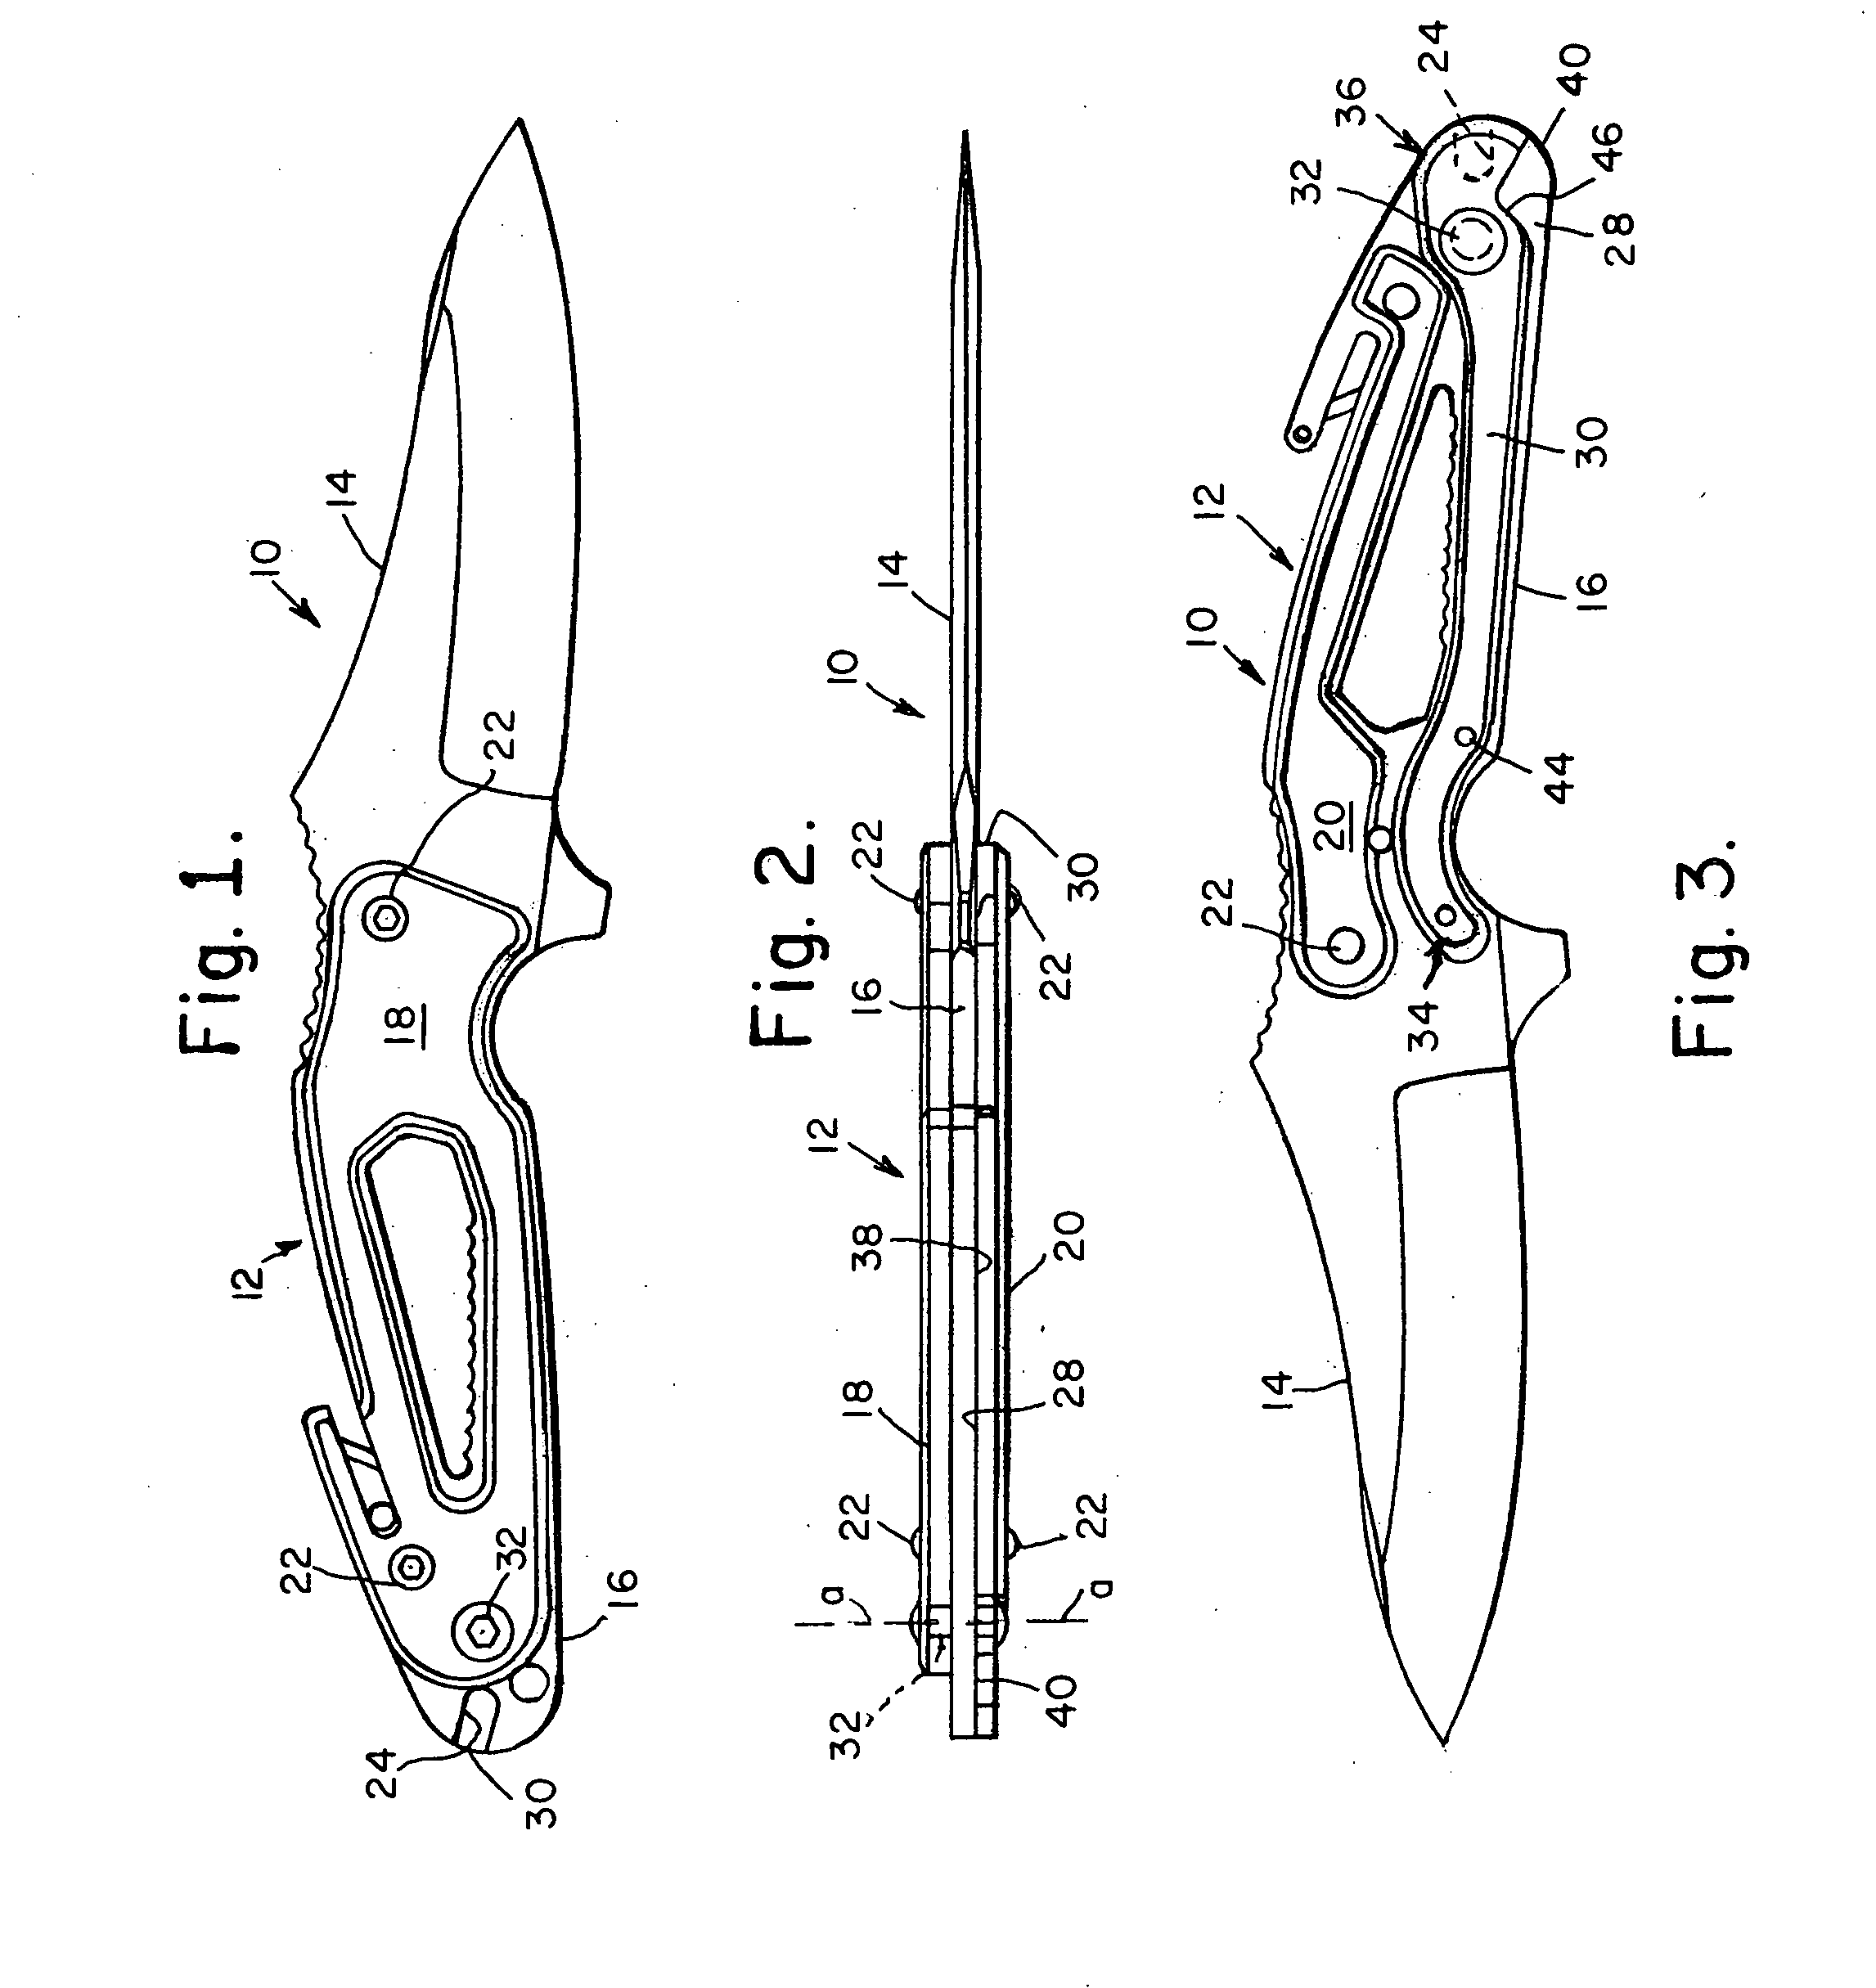 Knives with wire cutter